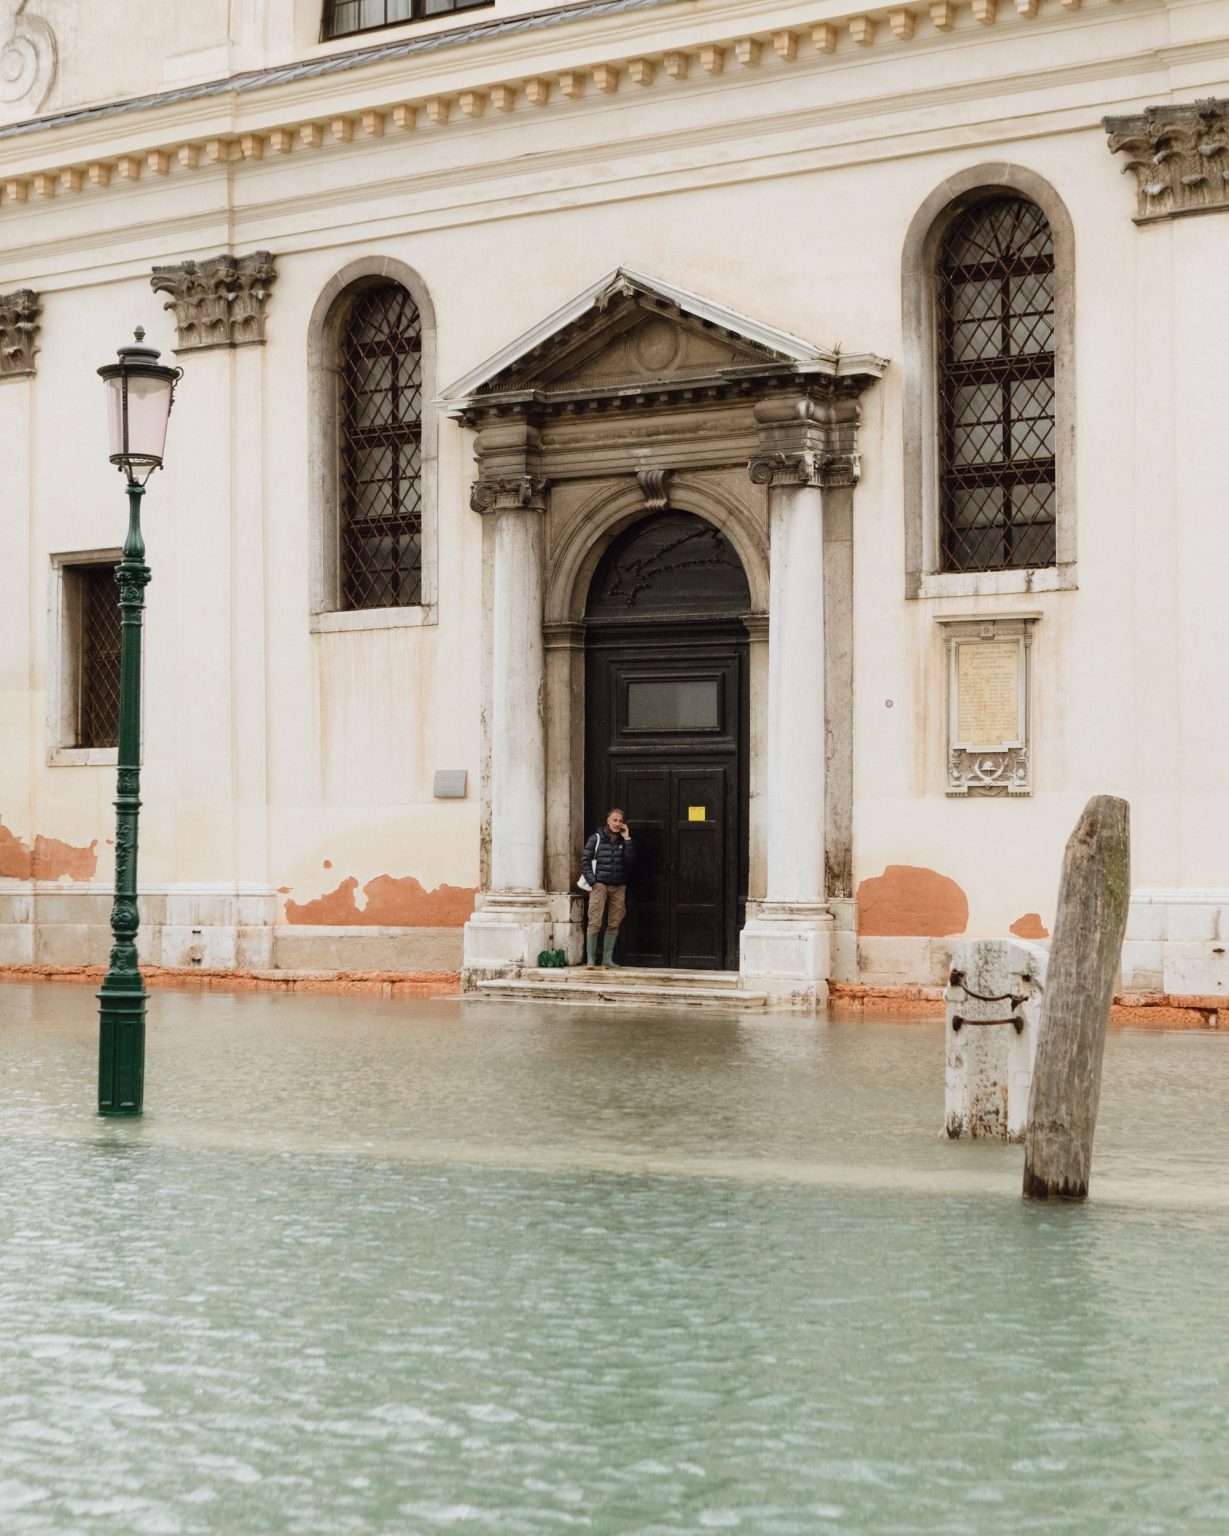 Exceptional acqua alta, or high water, in Venice, where the tide went up to 187cm, the highest level since the 1966 flood. Brugnaro, the mayor declared a state of disaster. Venice, Italy, 2019 